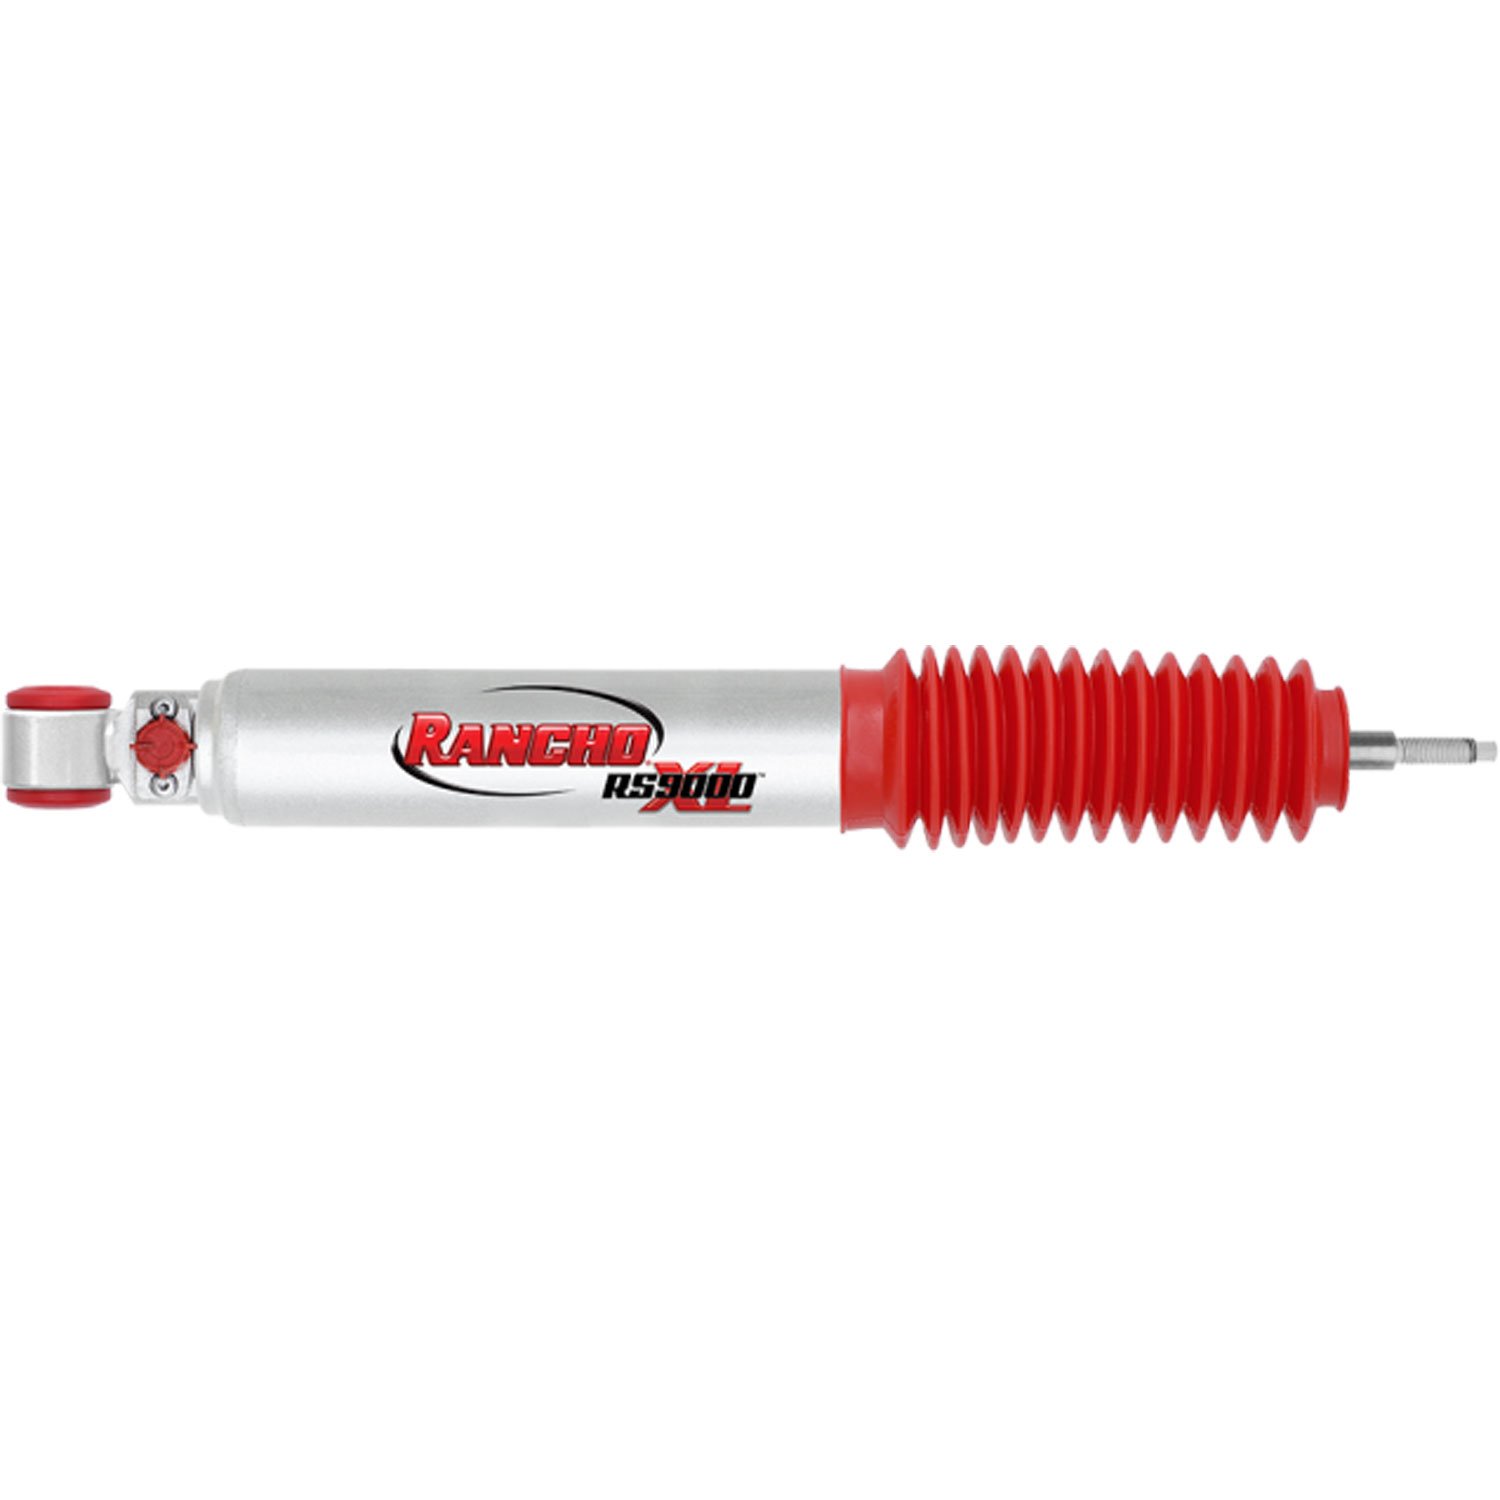 RS9000XL Rear Shock Absorber Fits Honda Passport and